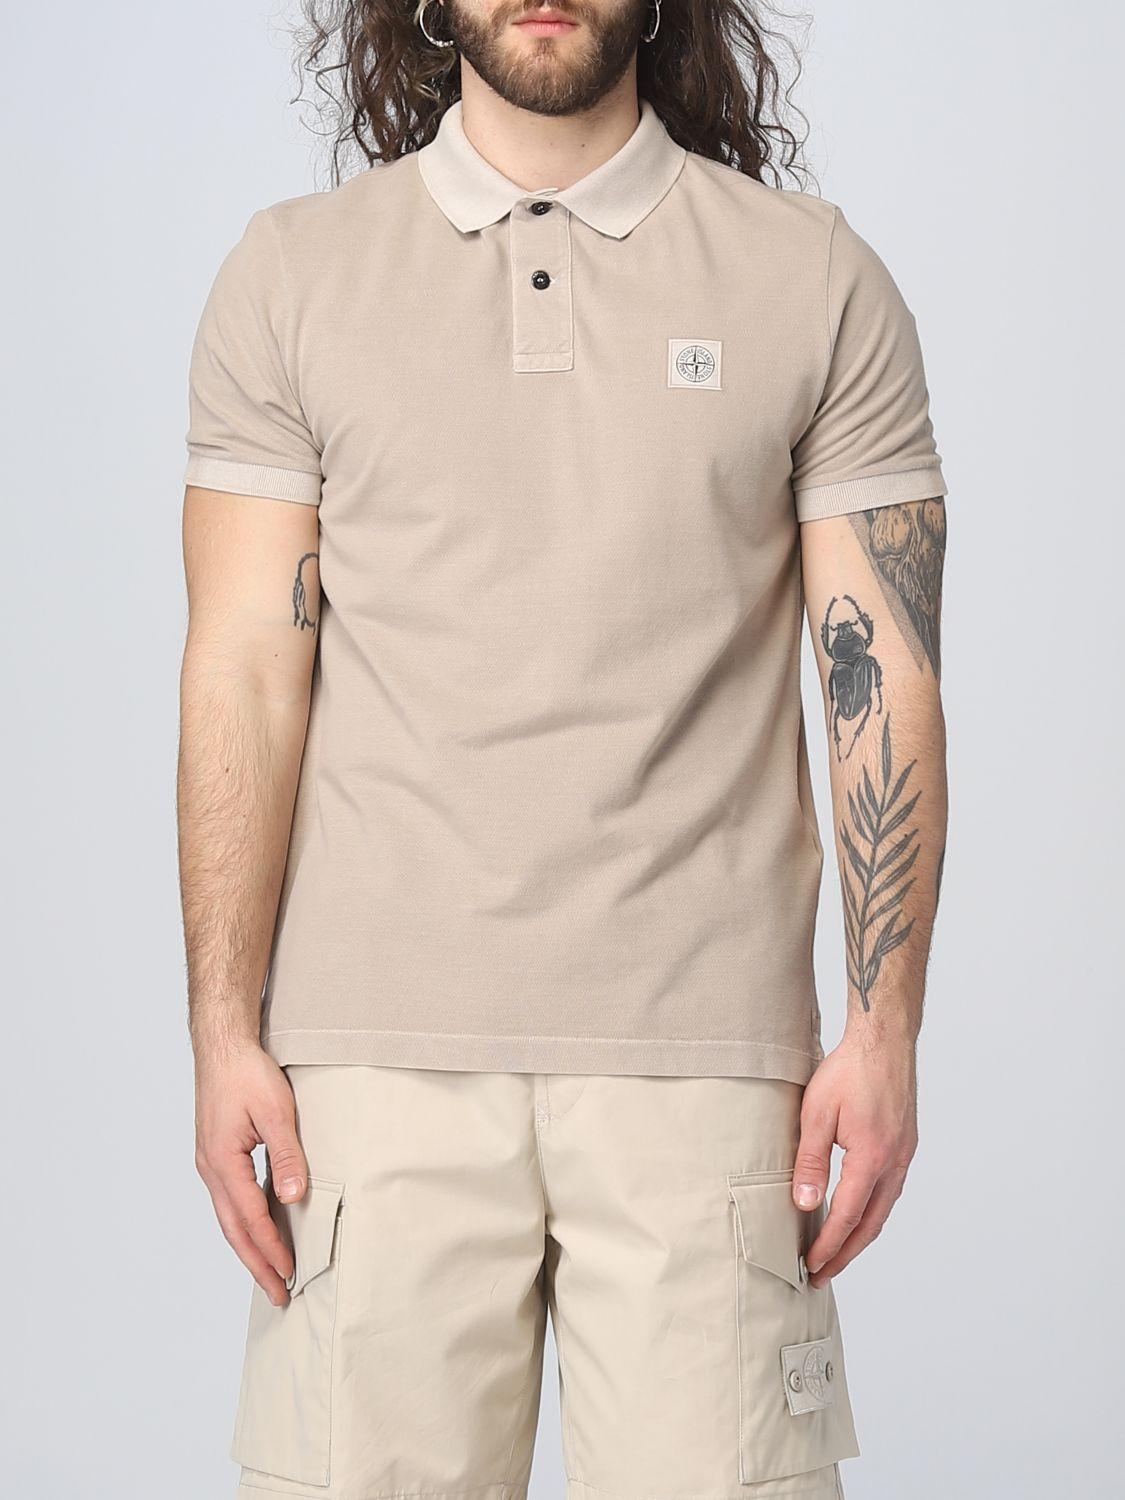 Grundig bag Isse Stone Island Polo Shirt in Natural for Men | Lyst